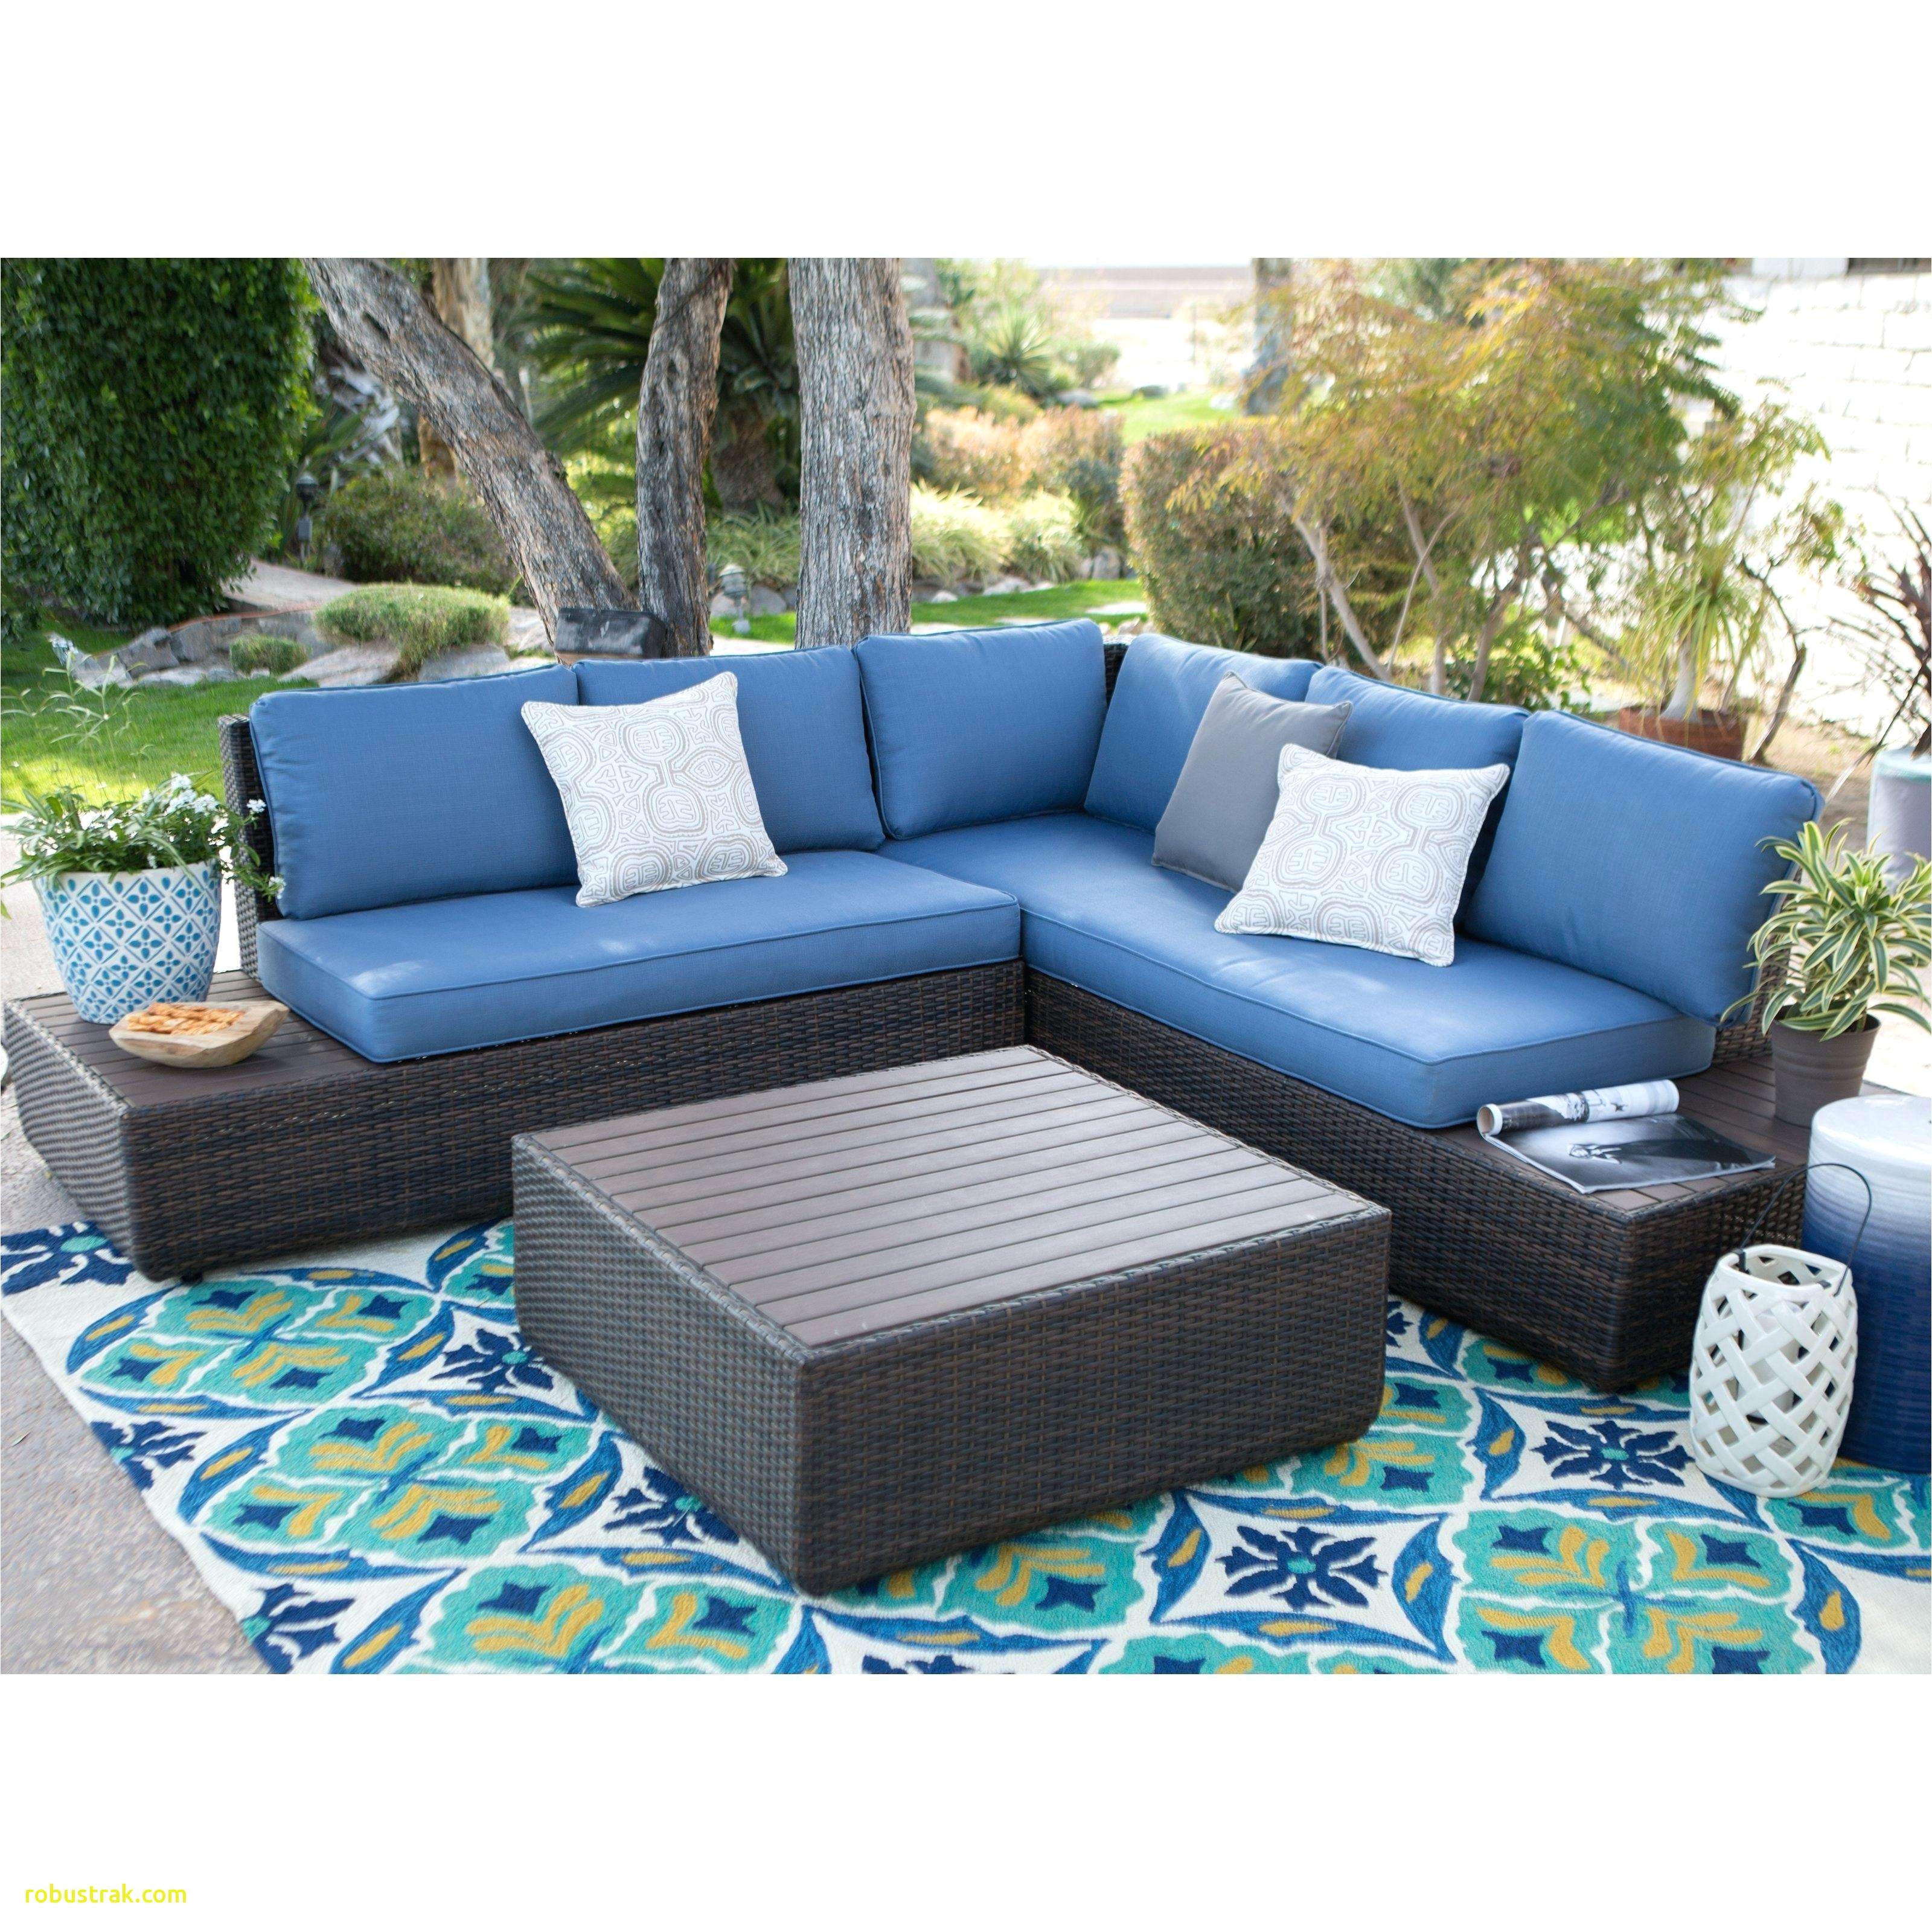 Leather sofa Sectional with Chaise Best Luxury Blue Sectional sofa 14beautiful Leather sofa Sectional